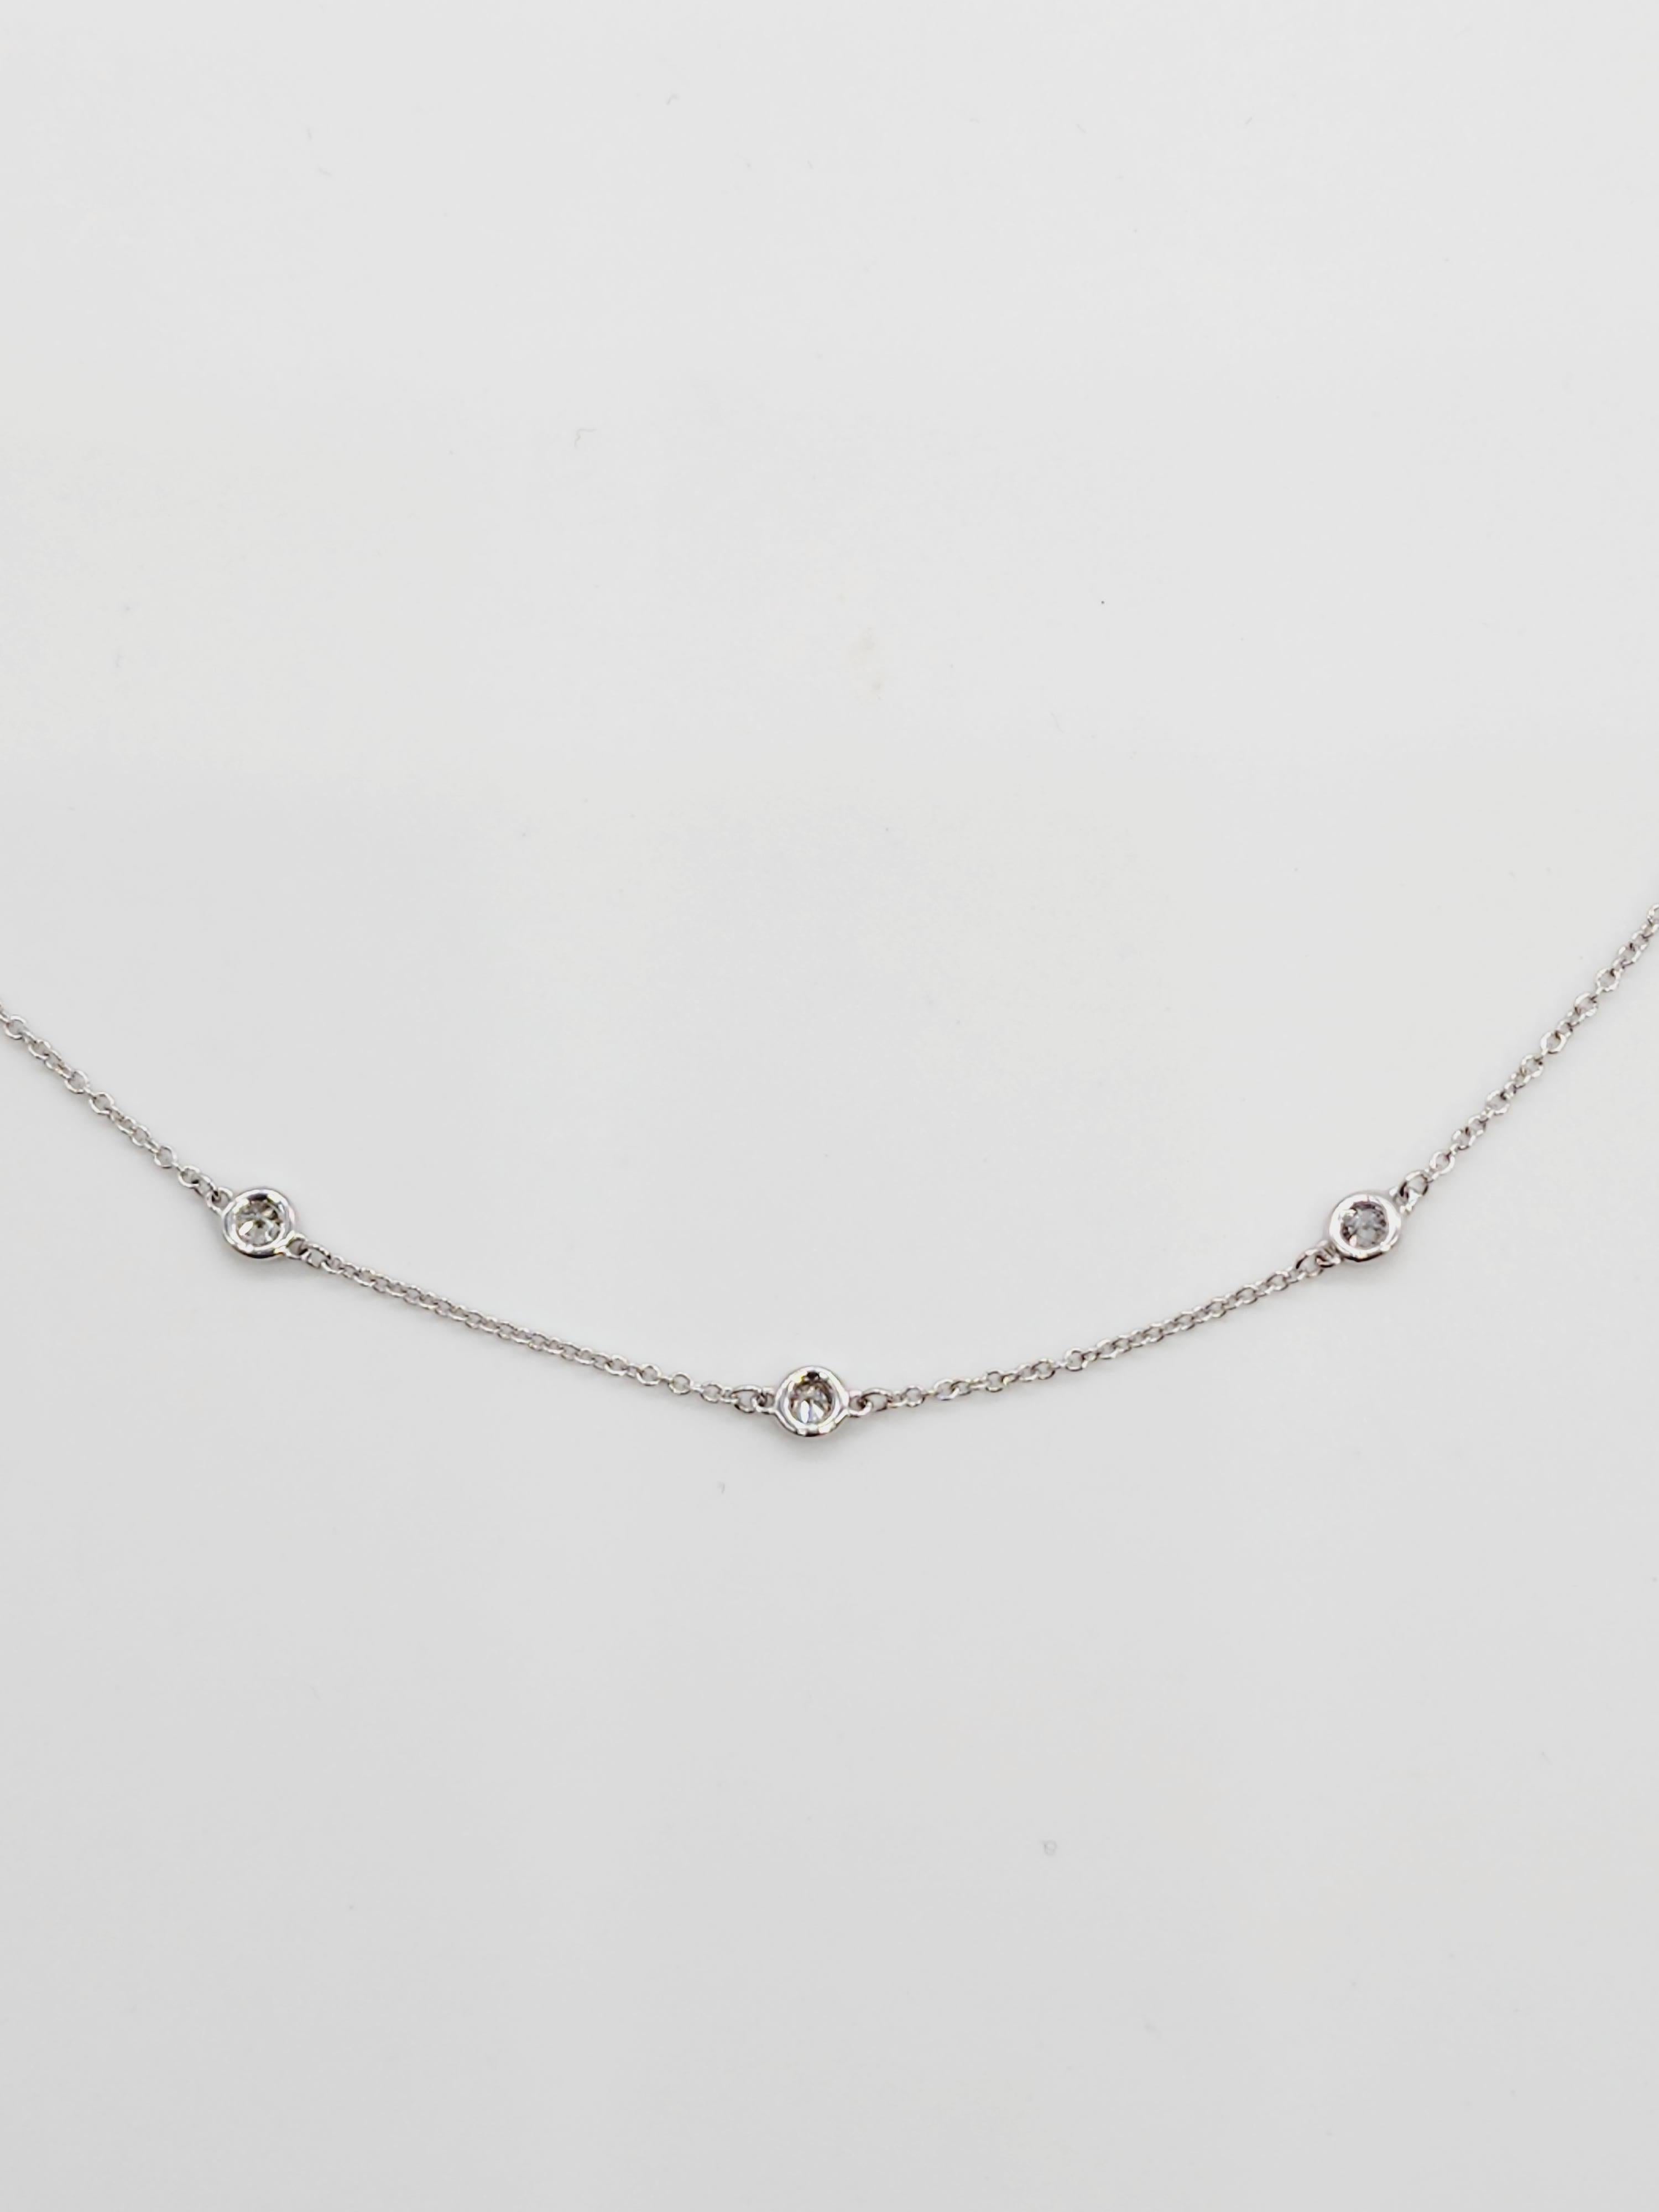 Women's 1.55 Carats Stations Diamond by the Yard Necklace 14 Karat White Gold For Sale